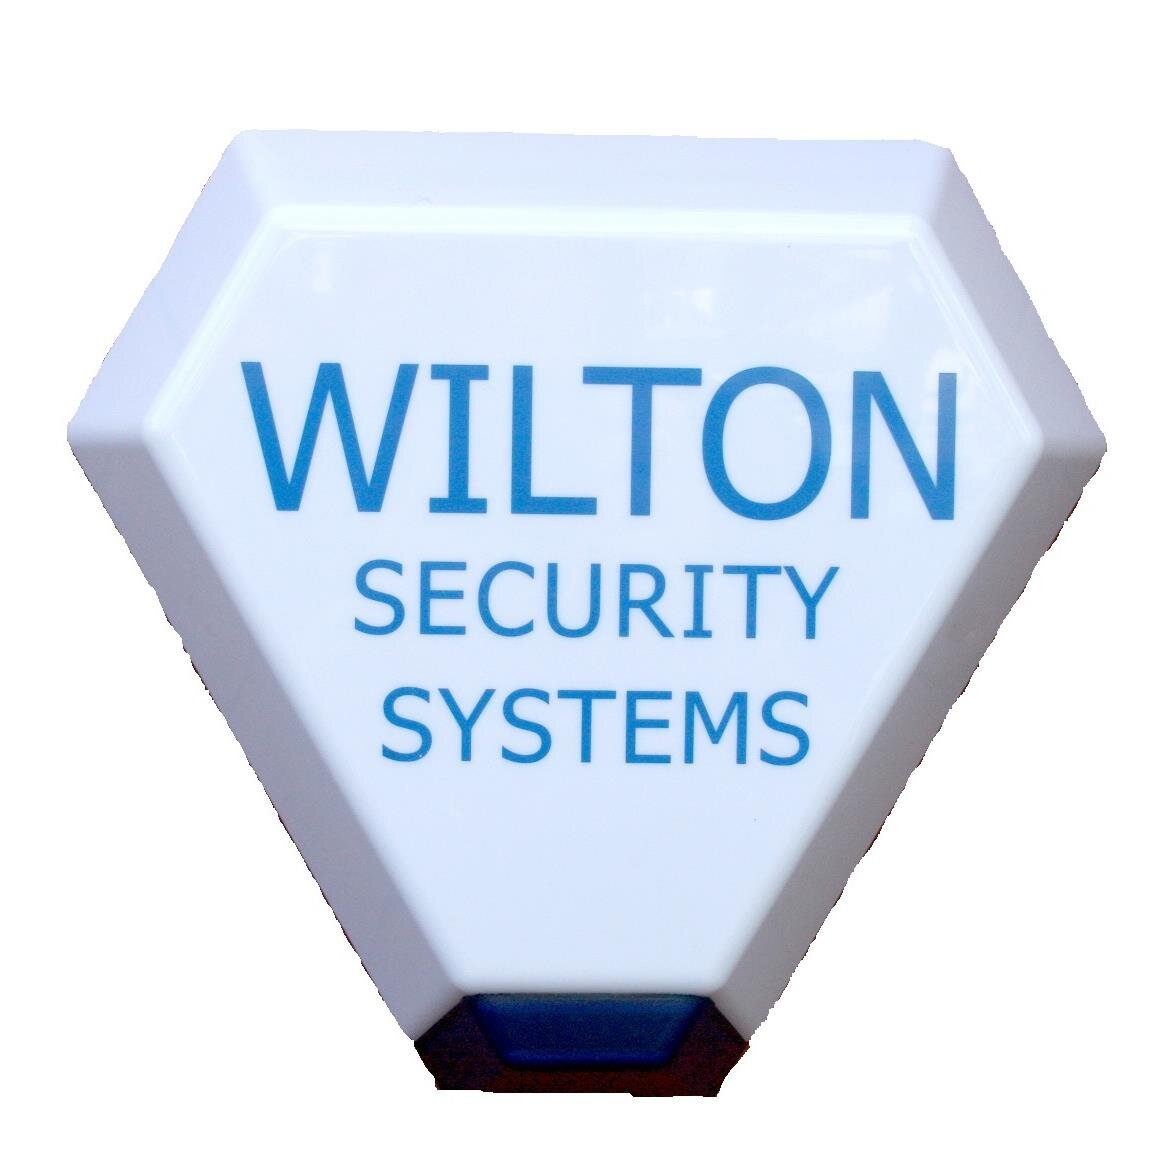 Specialist installer of electronic security systems, Intruder Alarms (Audible and with Police response), CCTV and Access Control. Established 1984